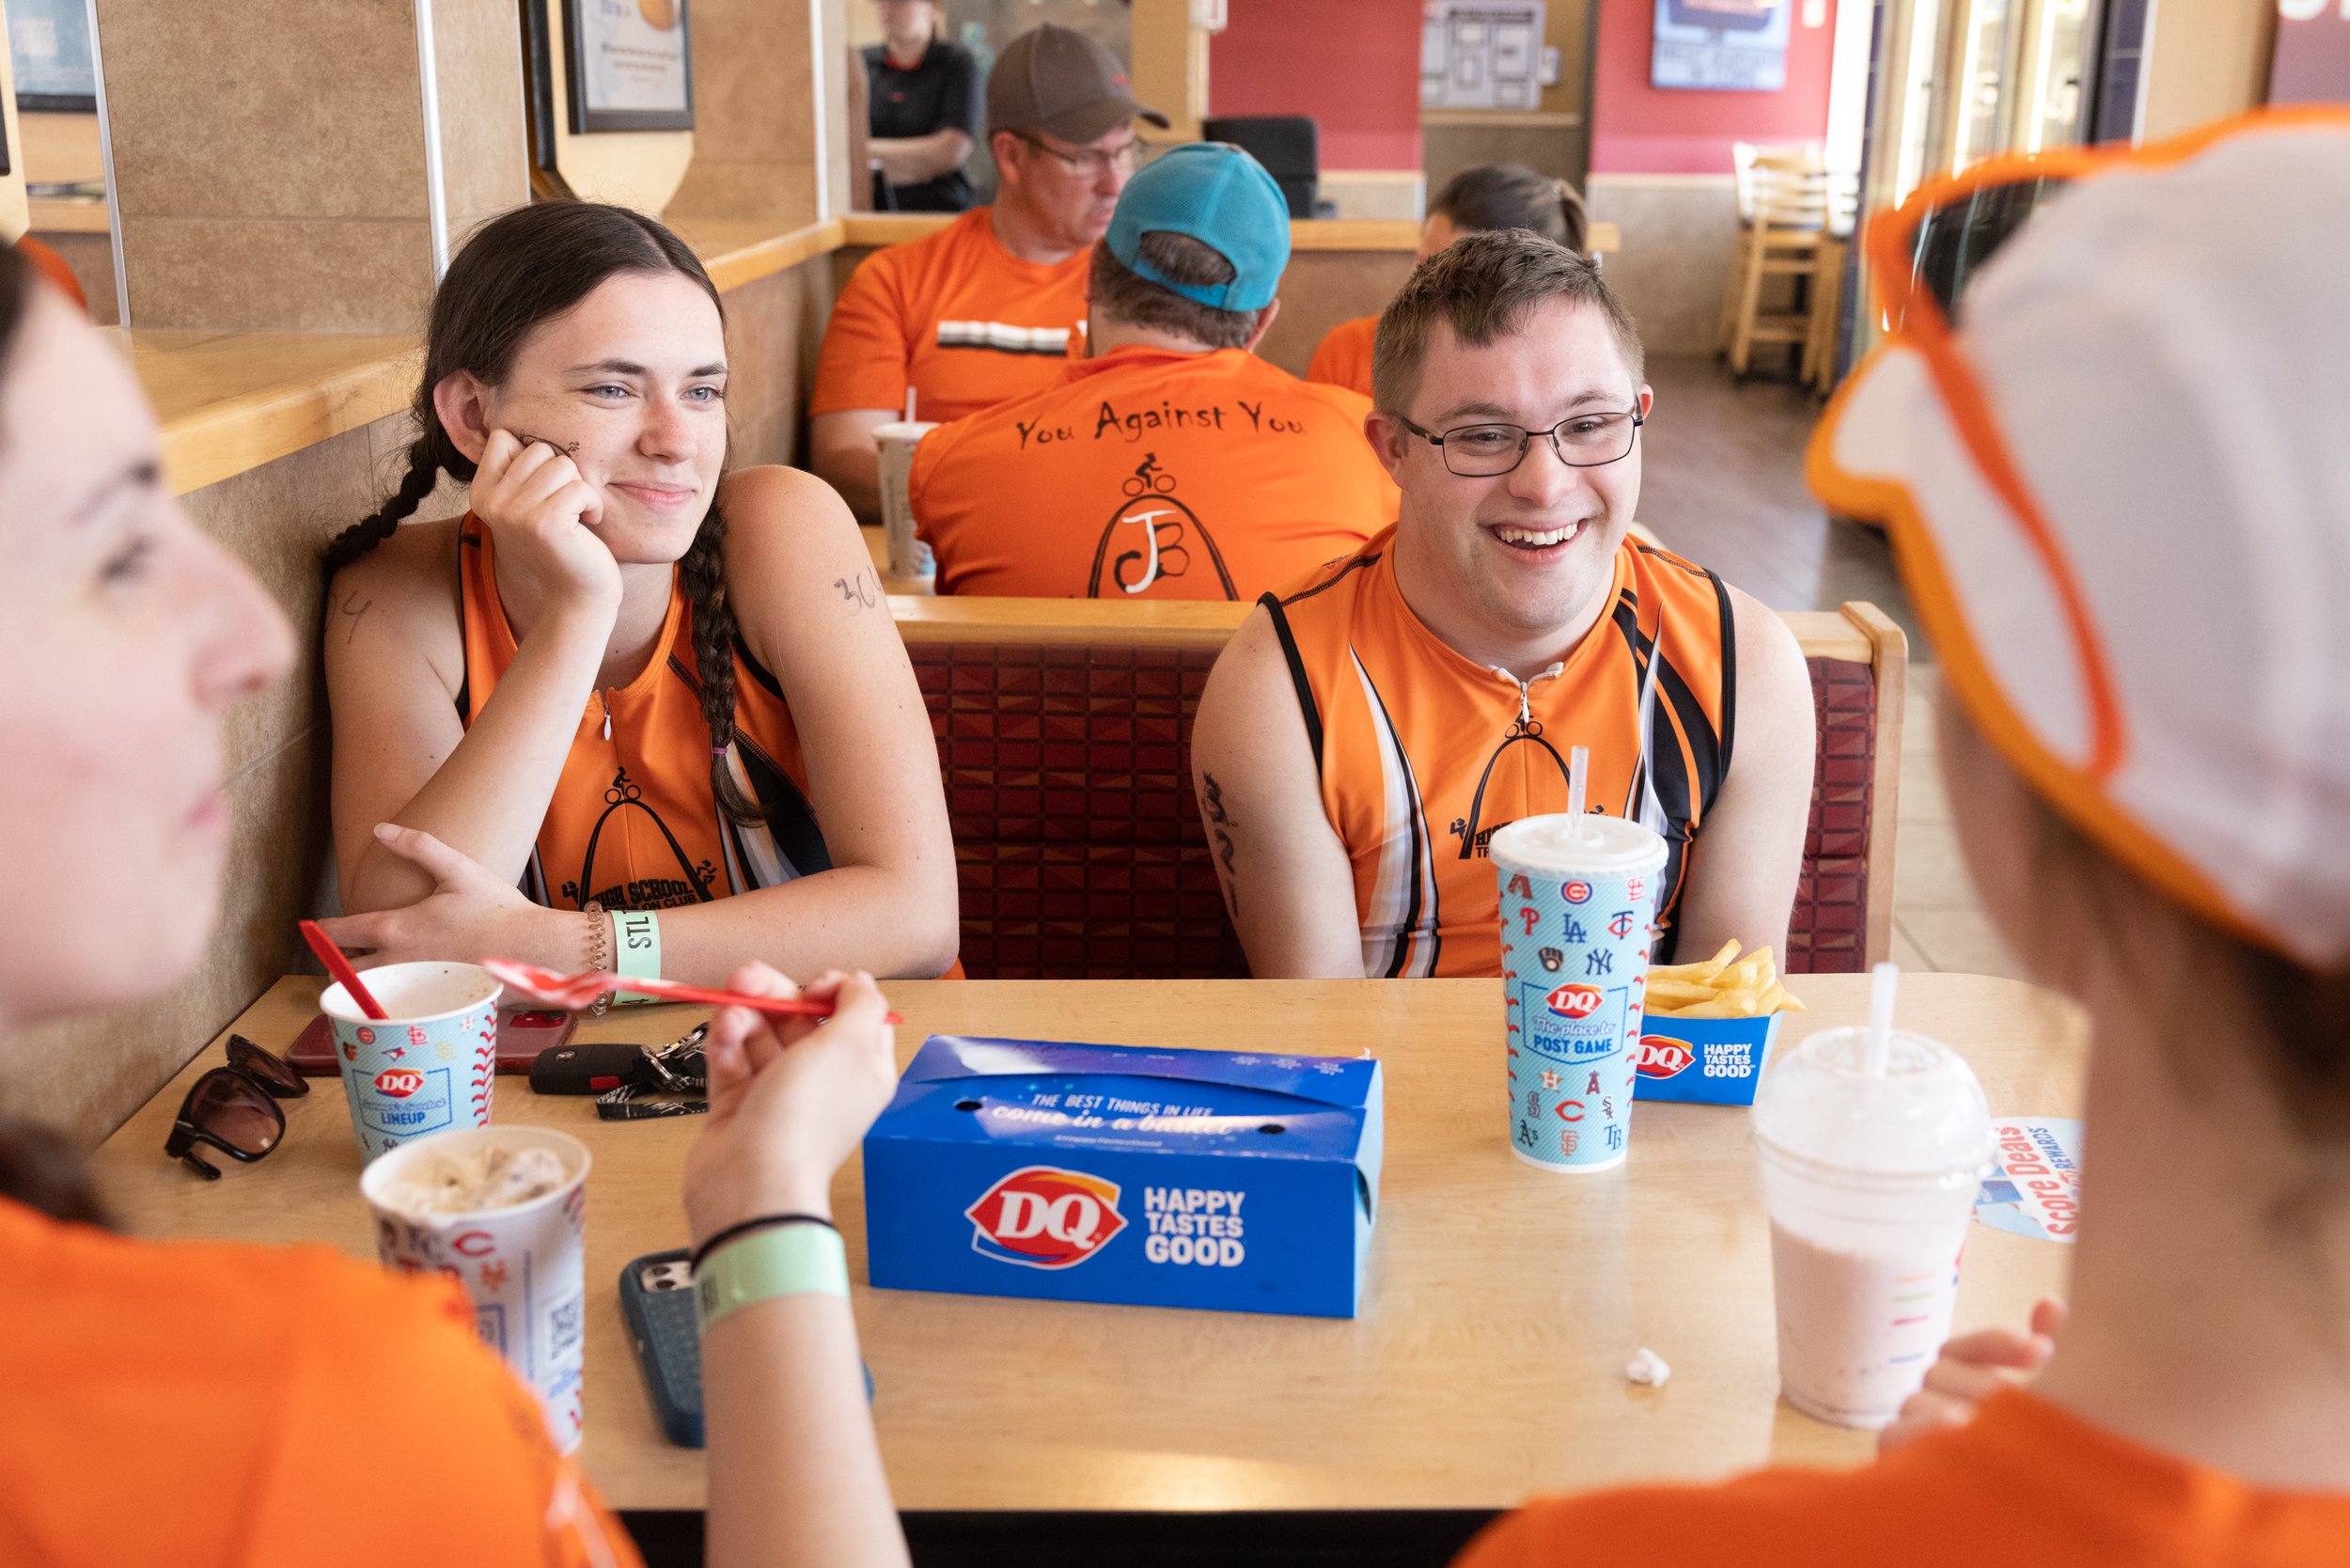  Gabriel smiled while getting food with teammates from the High School Triathlon Club, including Caroline Rousseau (next to Gabriel), Faith Curry (left in foreground) and Trinity Young (right in foreground), following a race May 21 at Dairy Queen in 